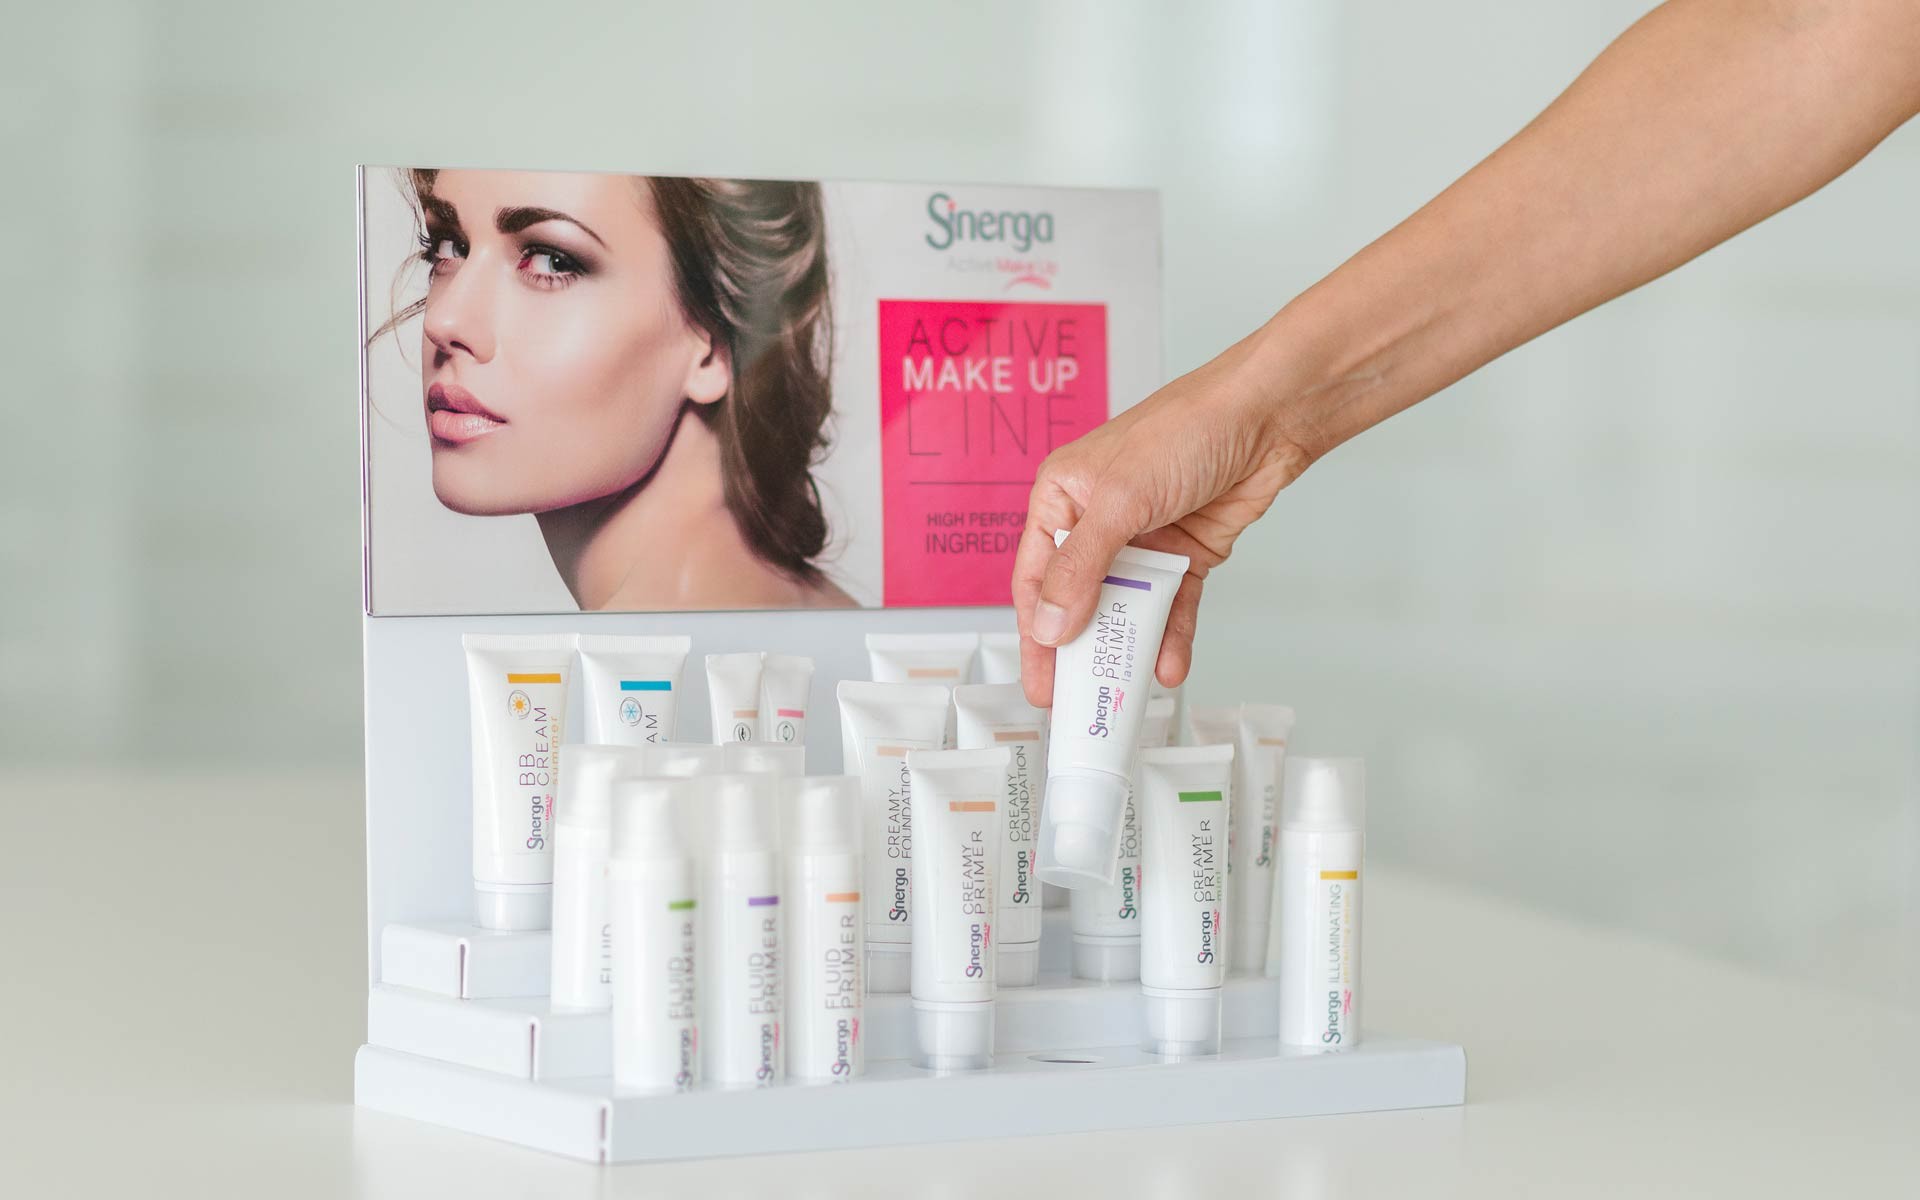 The Active Make Up line include a whole range of formulations that combine the performances of decorative make-up with the benefits of a real skin care treatment for prevention of aging signs.